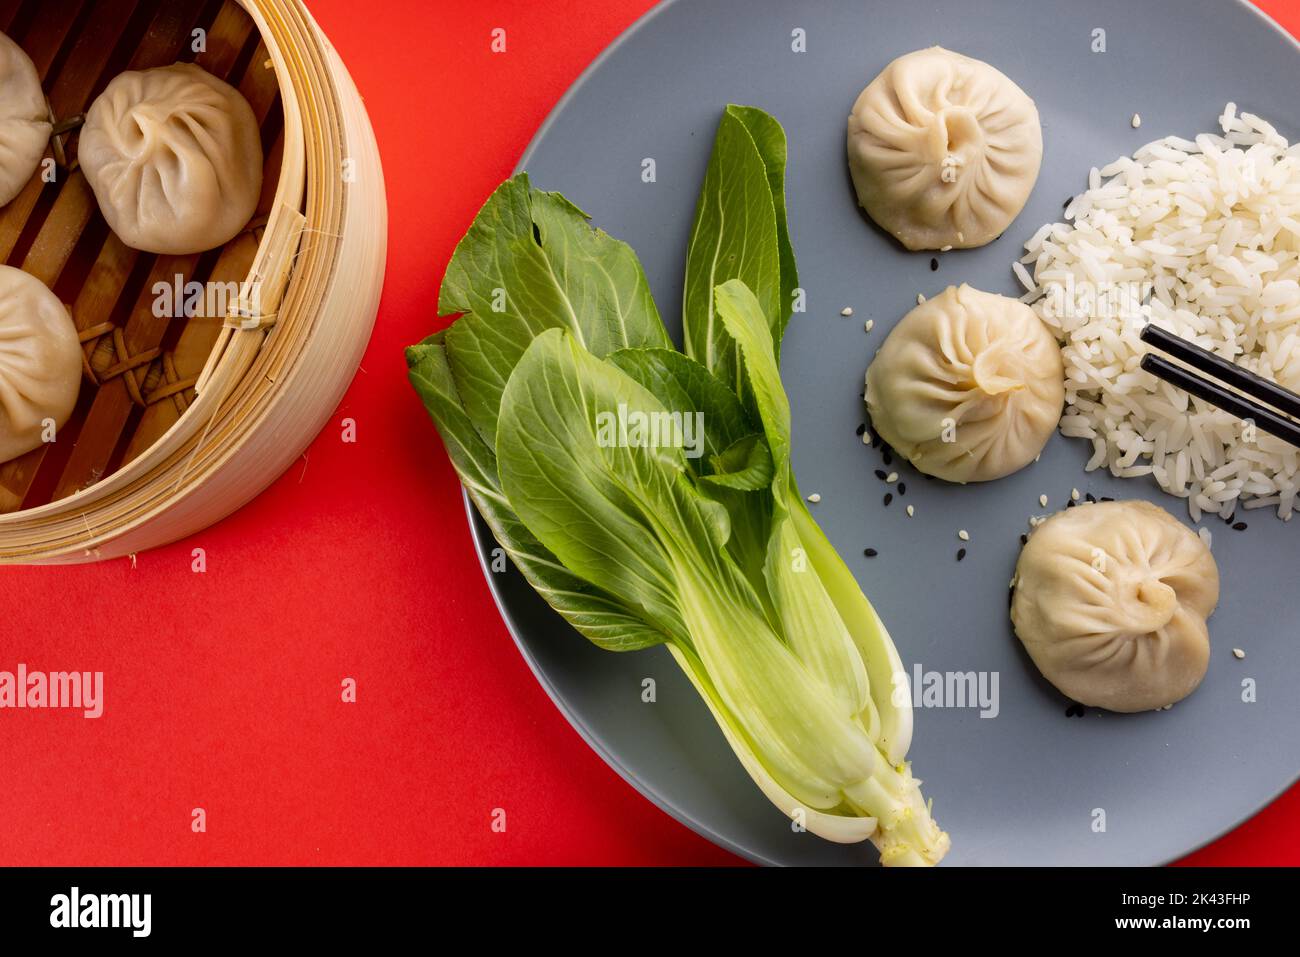 Overhead view of asian dumplings, rice, endive and chopsticks on red background Stock Photo